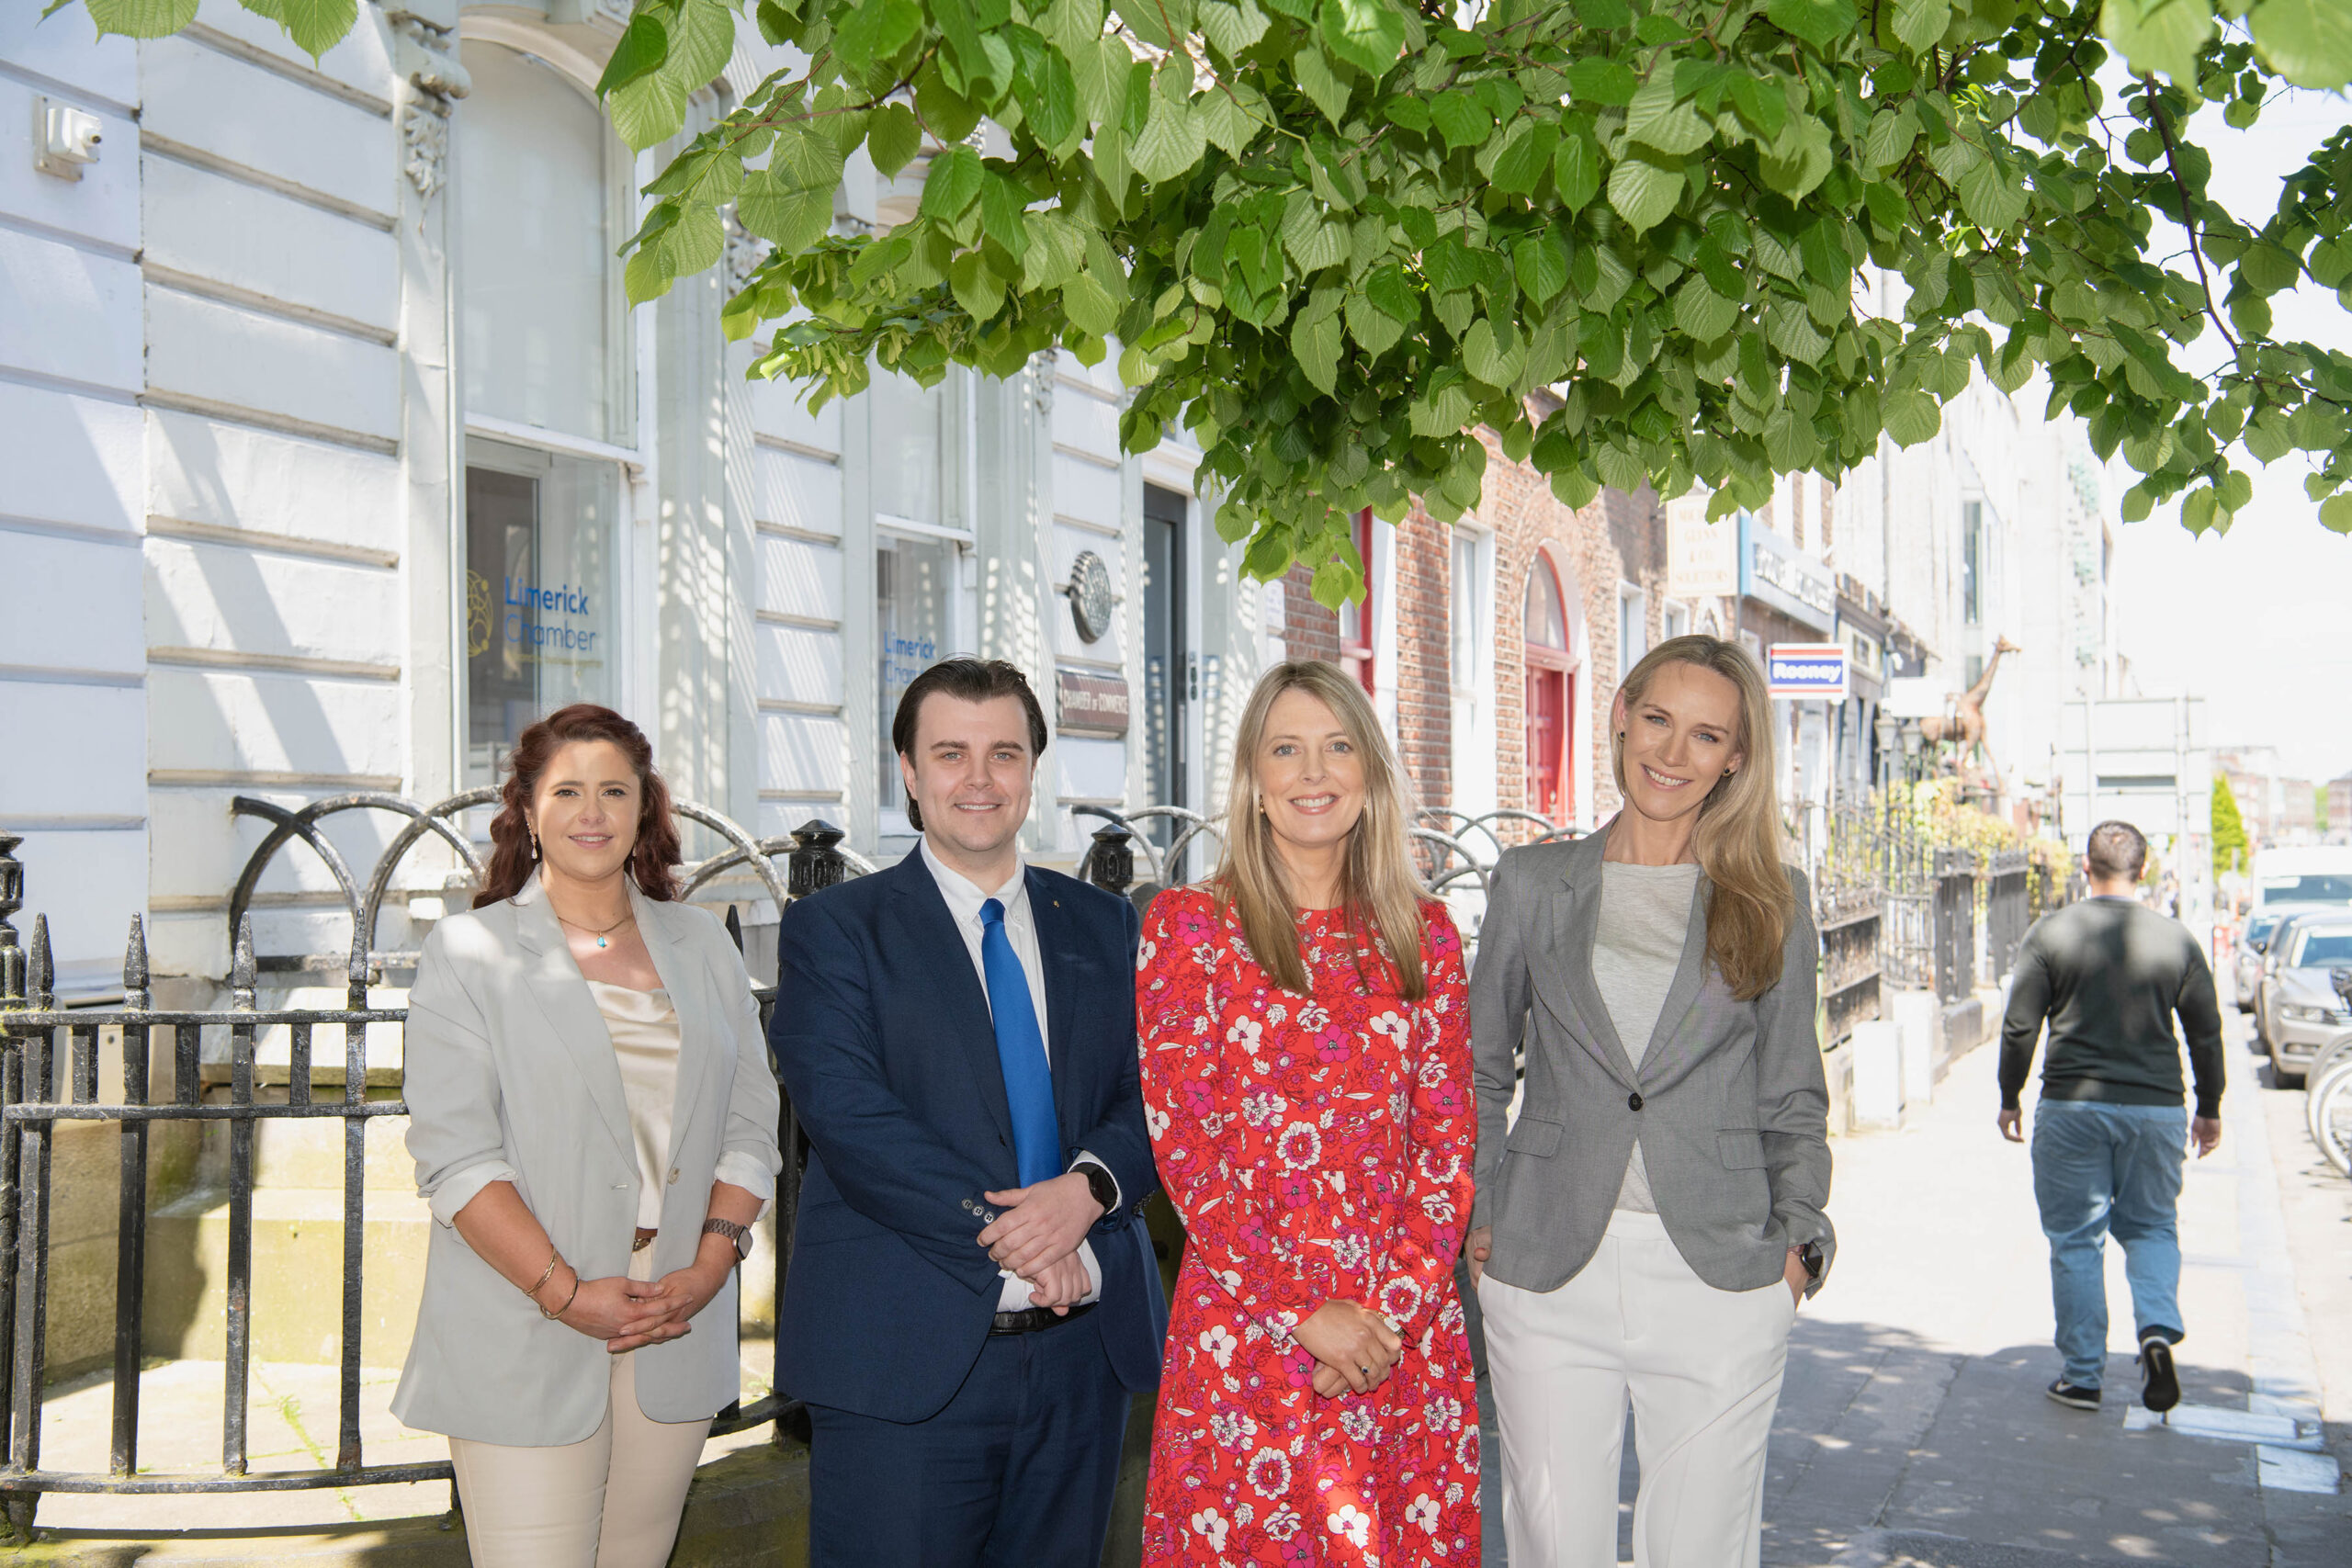 Limerick Chamber has emerged as strong contenders for this year's All-Ireland Chamber Awards having been impressively nominated in four categories